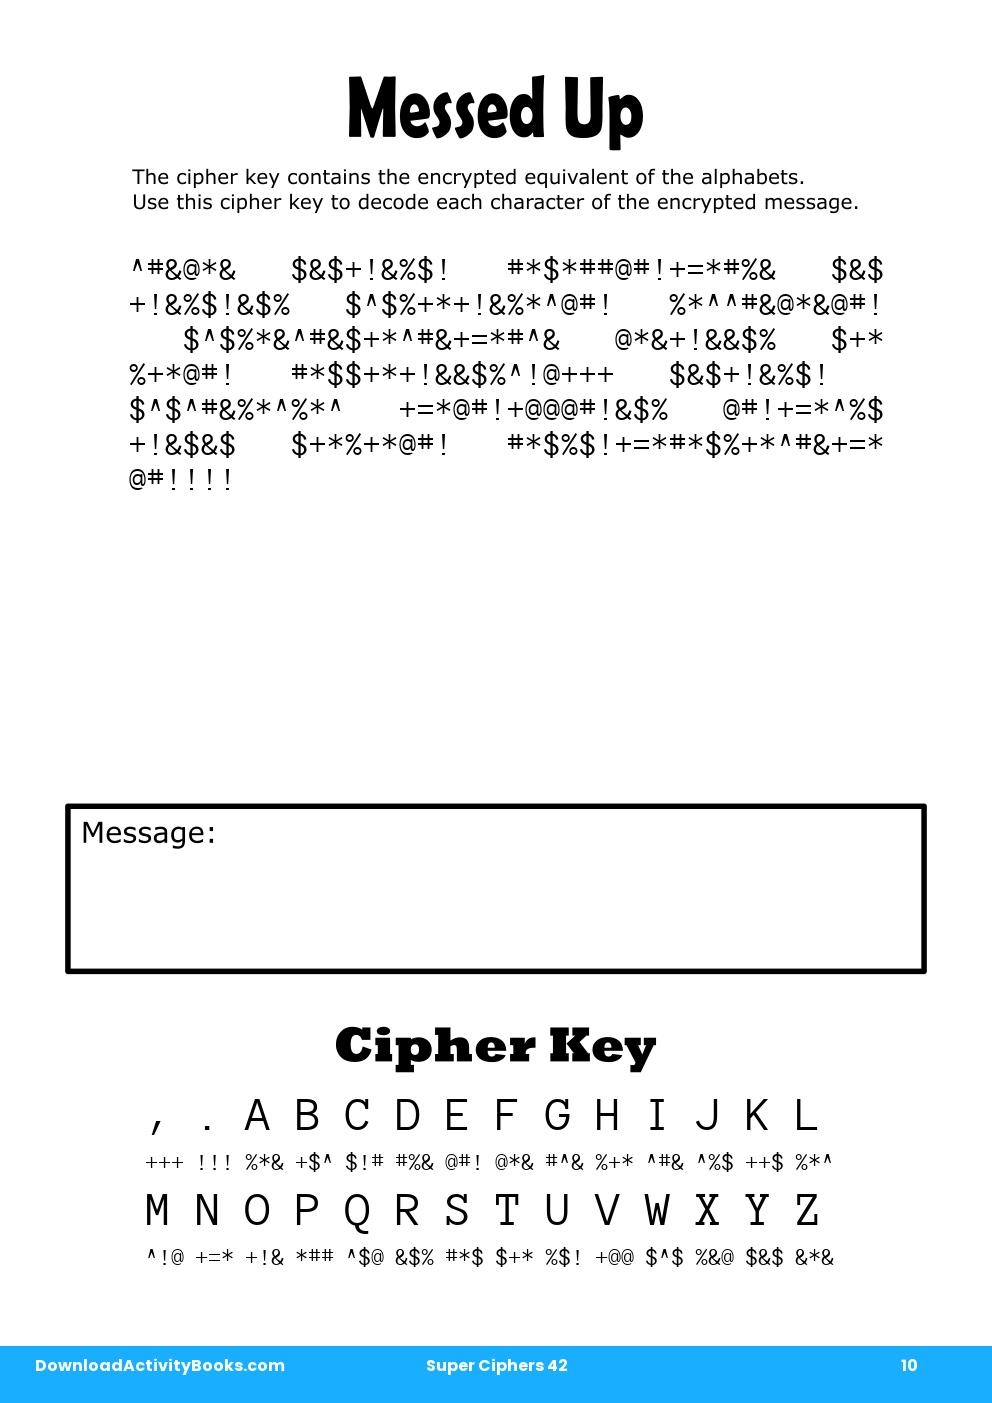 Messed Up in Super Ciphers 42